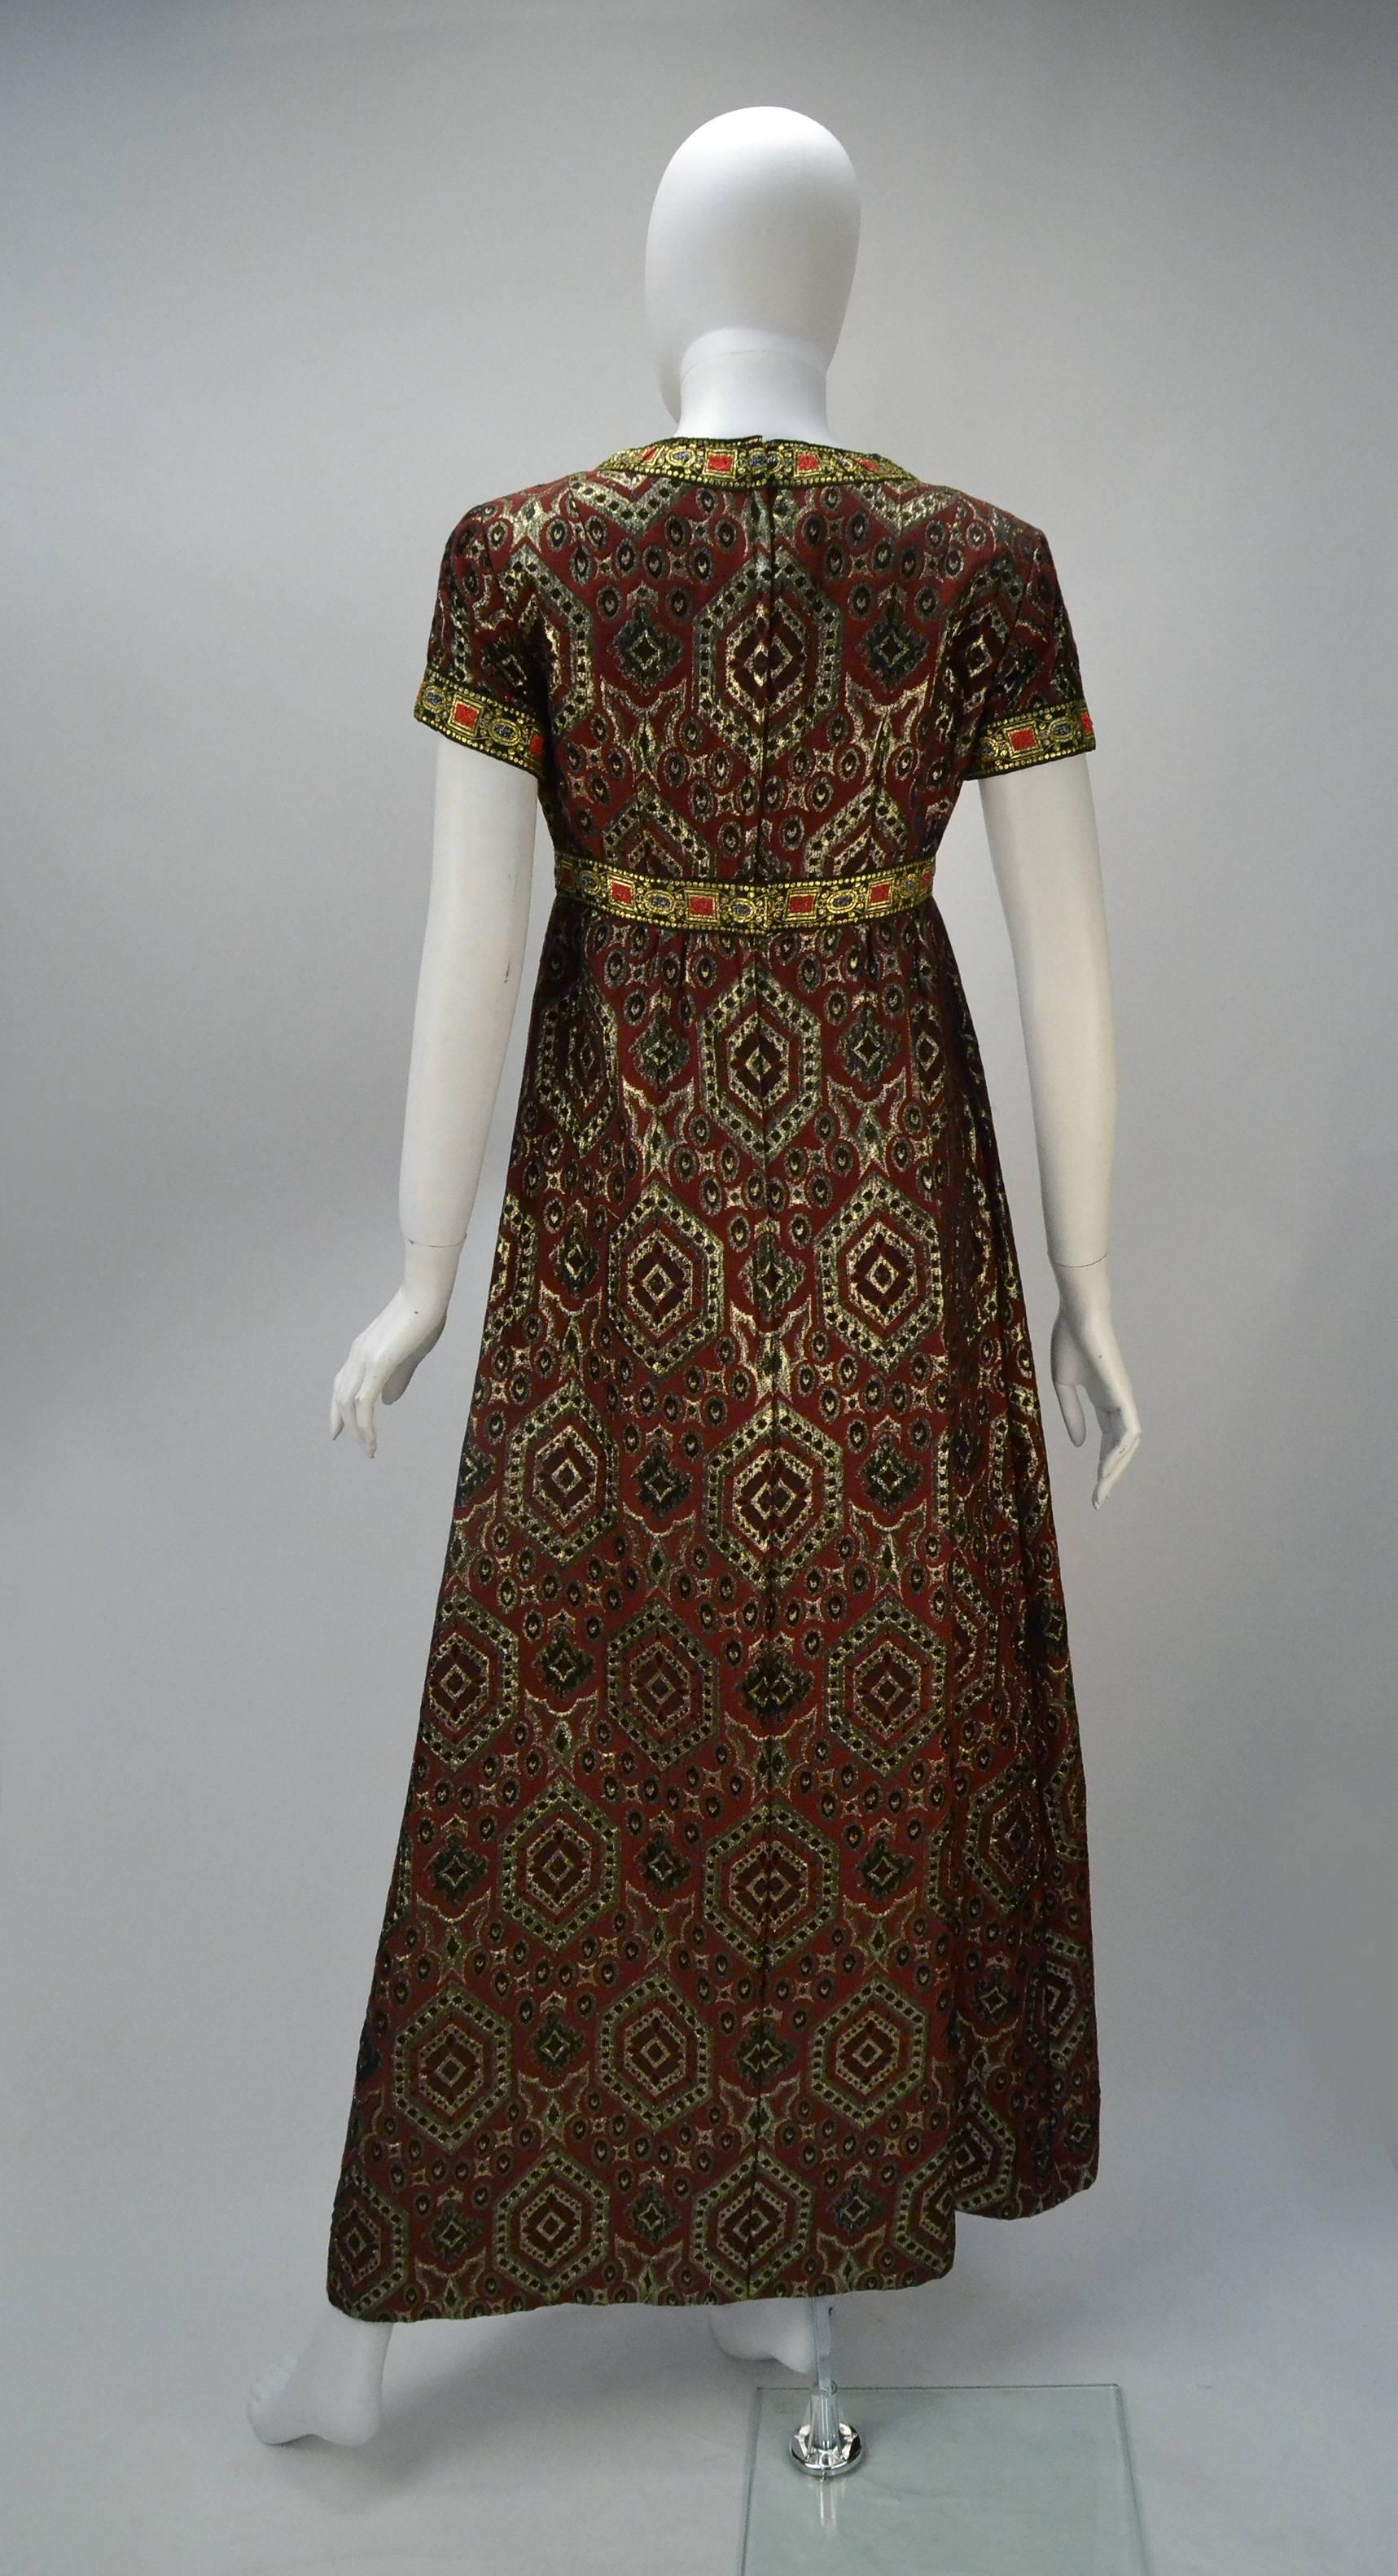 Black Deep Red Dress with Gold Metallic Pattern, 1970s   